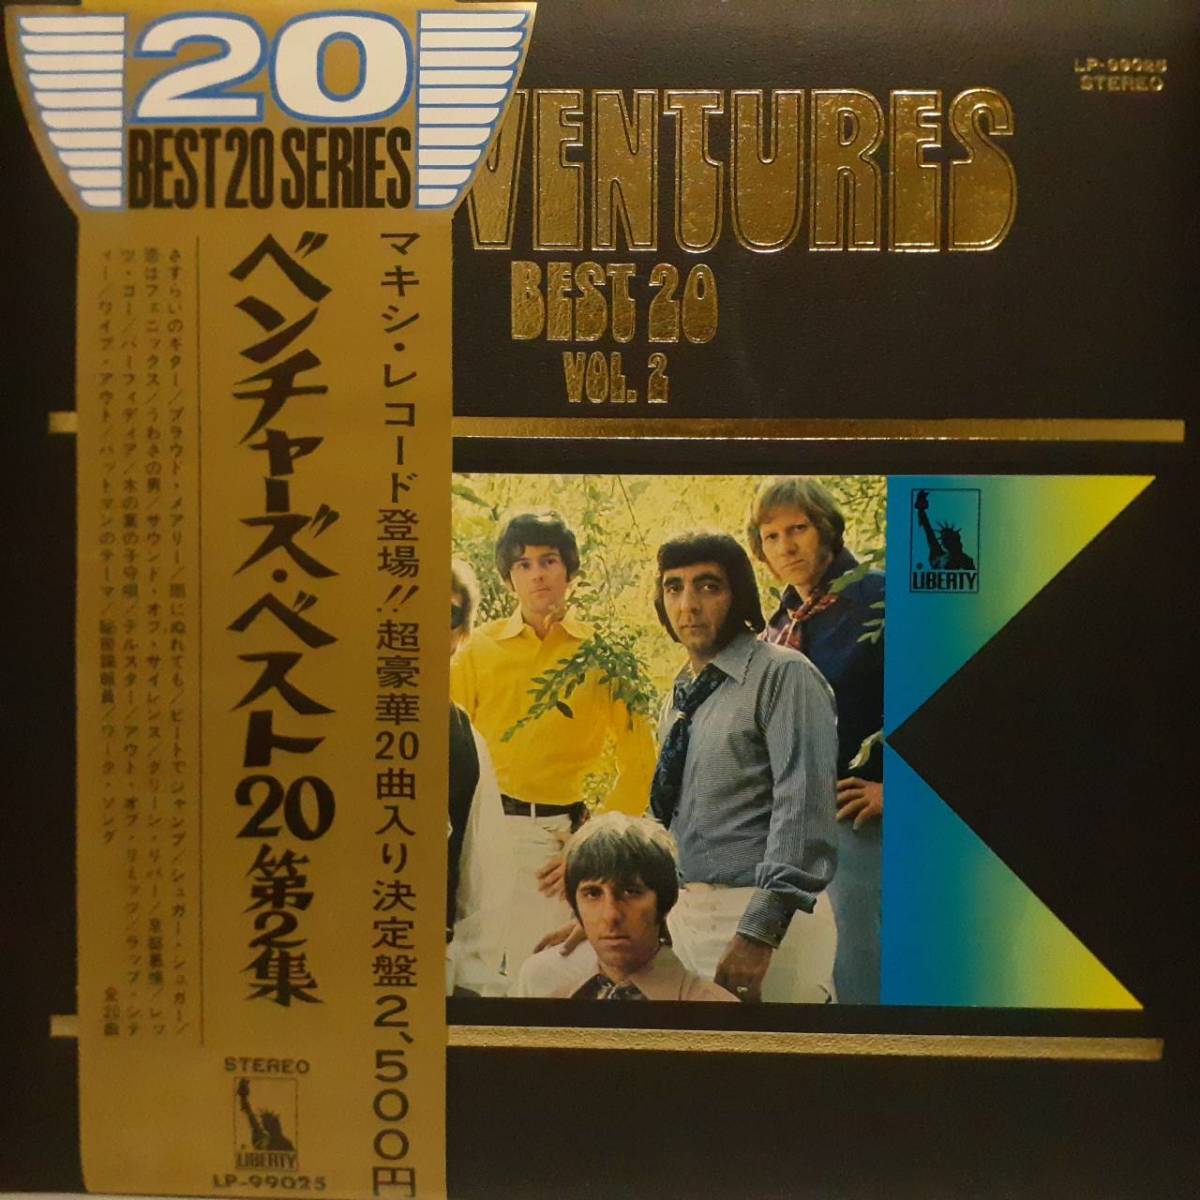  main member 4 person. with autograph! Japanese record LP obi attaching The Ventures / Best 20 Vol.2 1970 year LP-99025 Don Wilson Nokie Edwards Mel Taylor